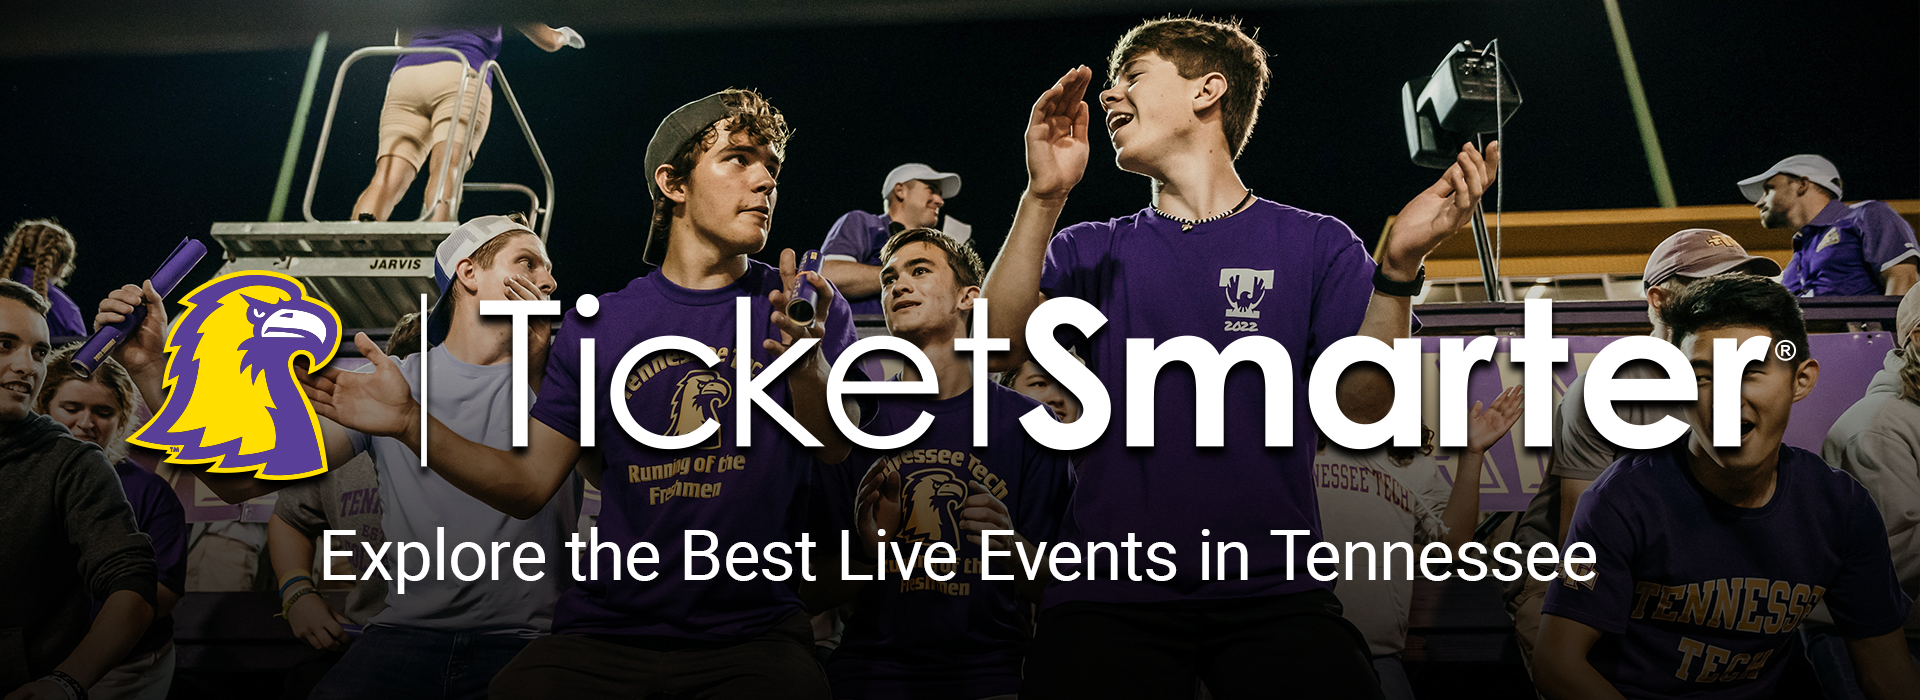 TicketSmarter offering 5% discount to Tennessee Tech students and fans